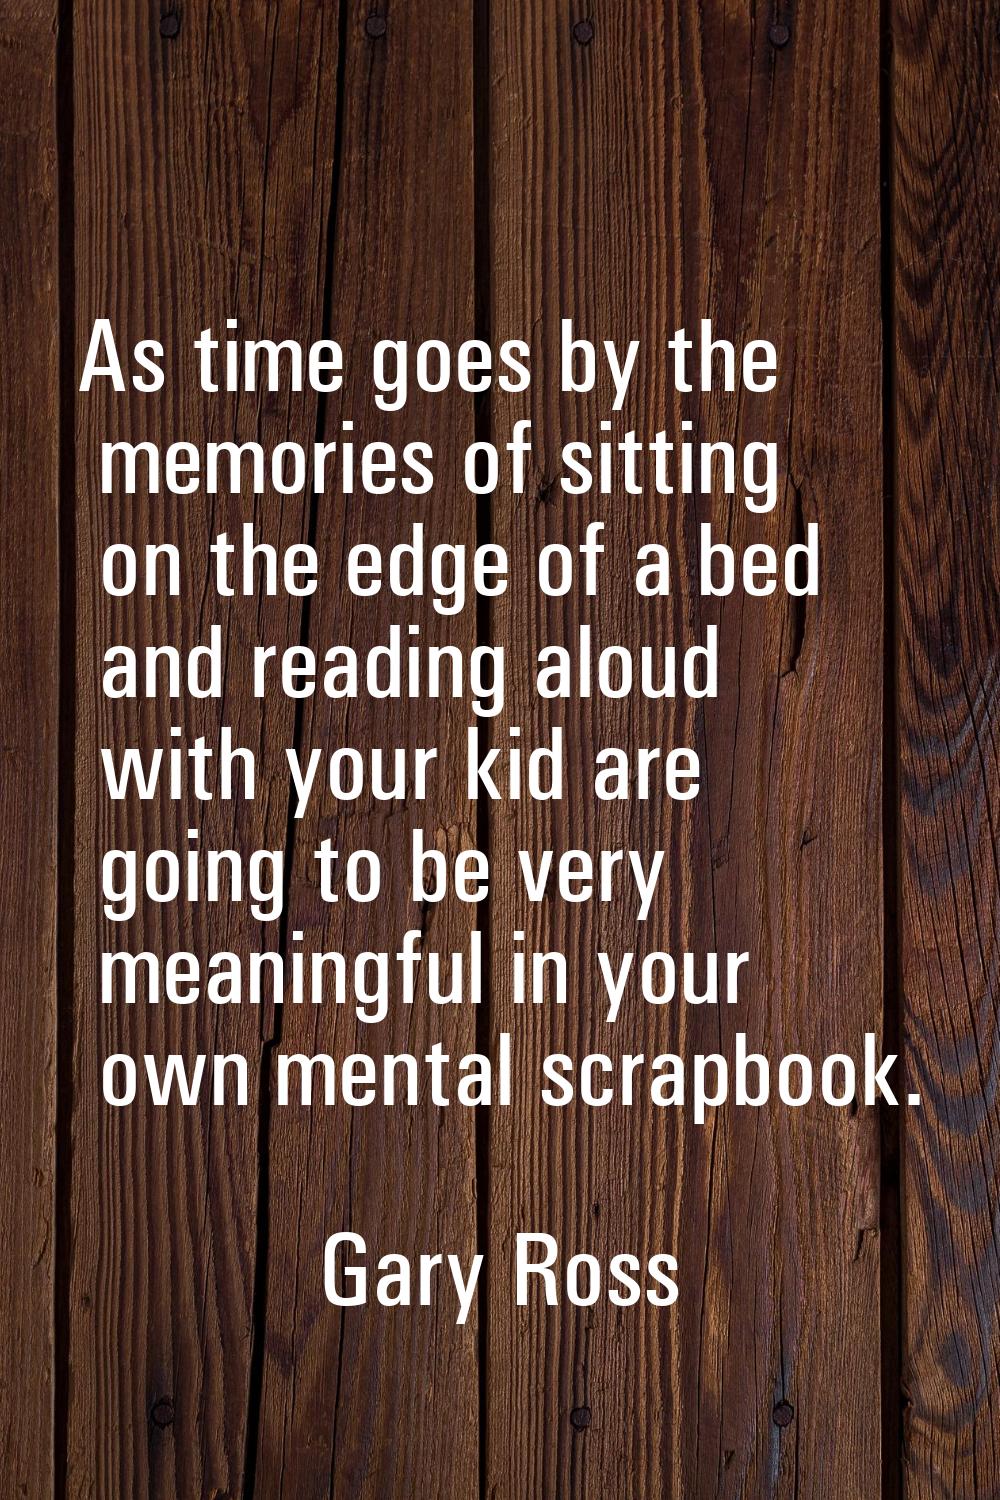 As time goes by the memories of sitting on the edge of a bed and reading aloud with your kid are go